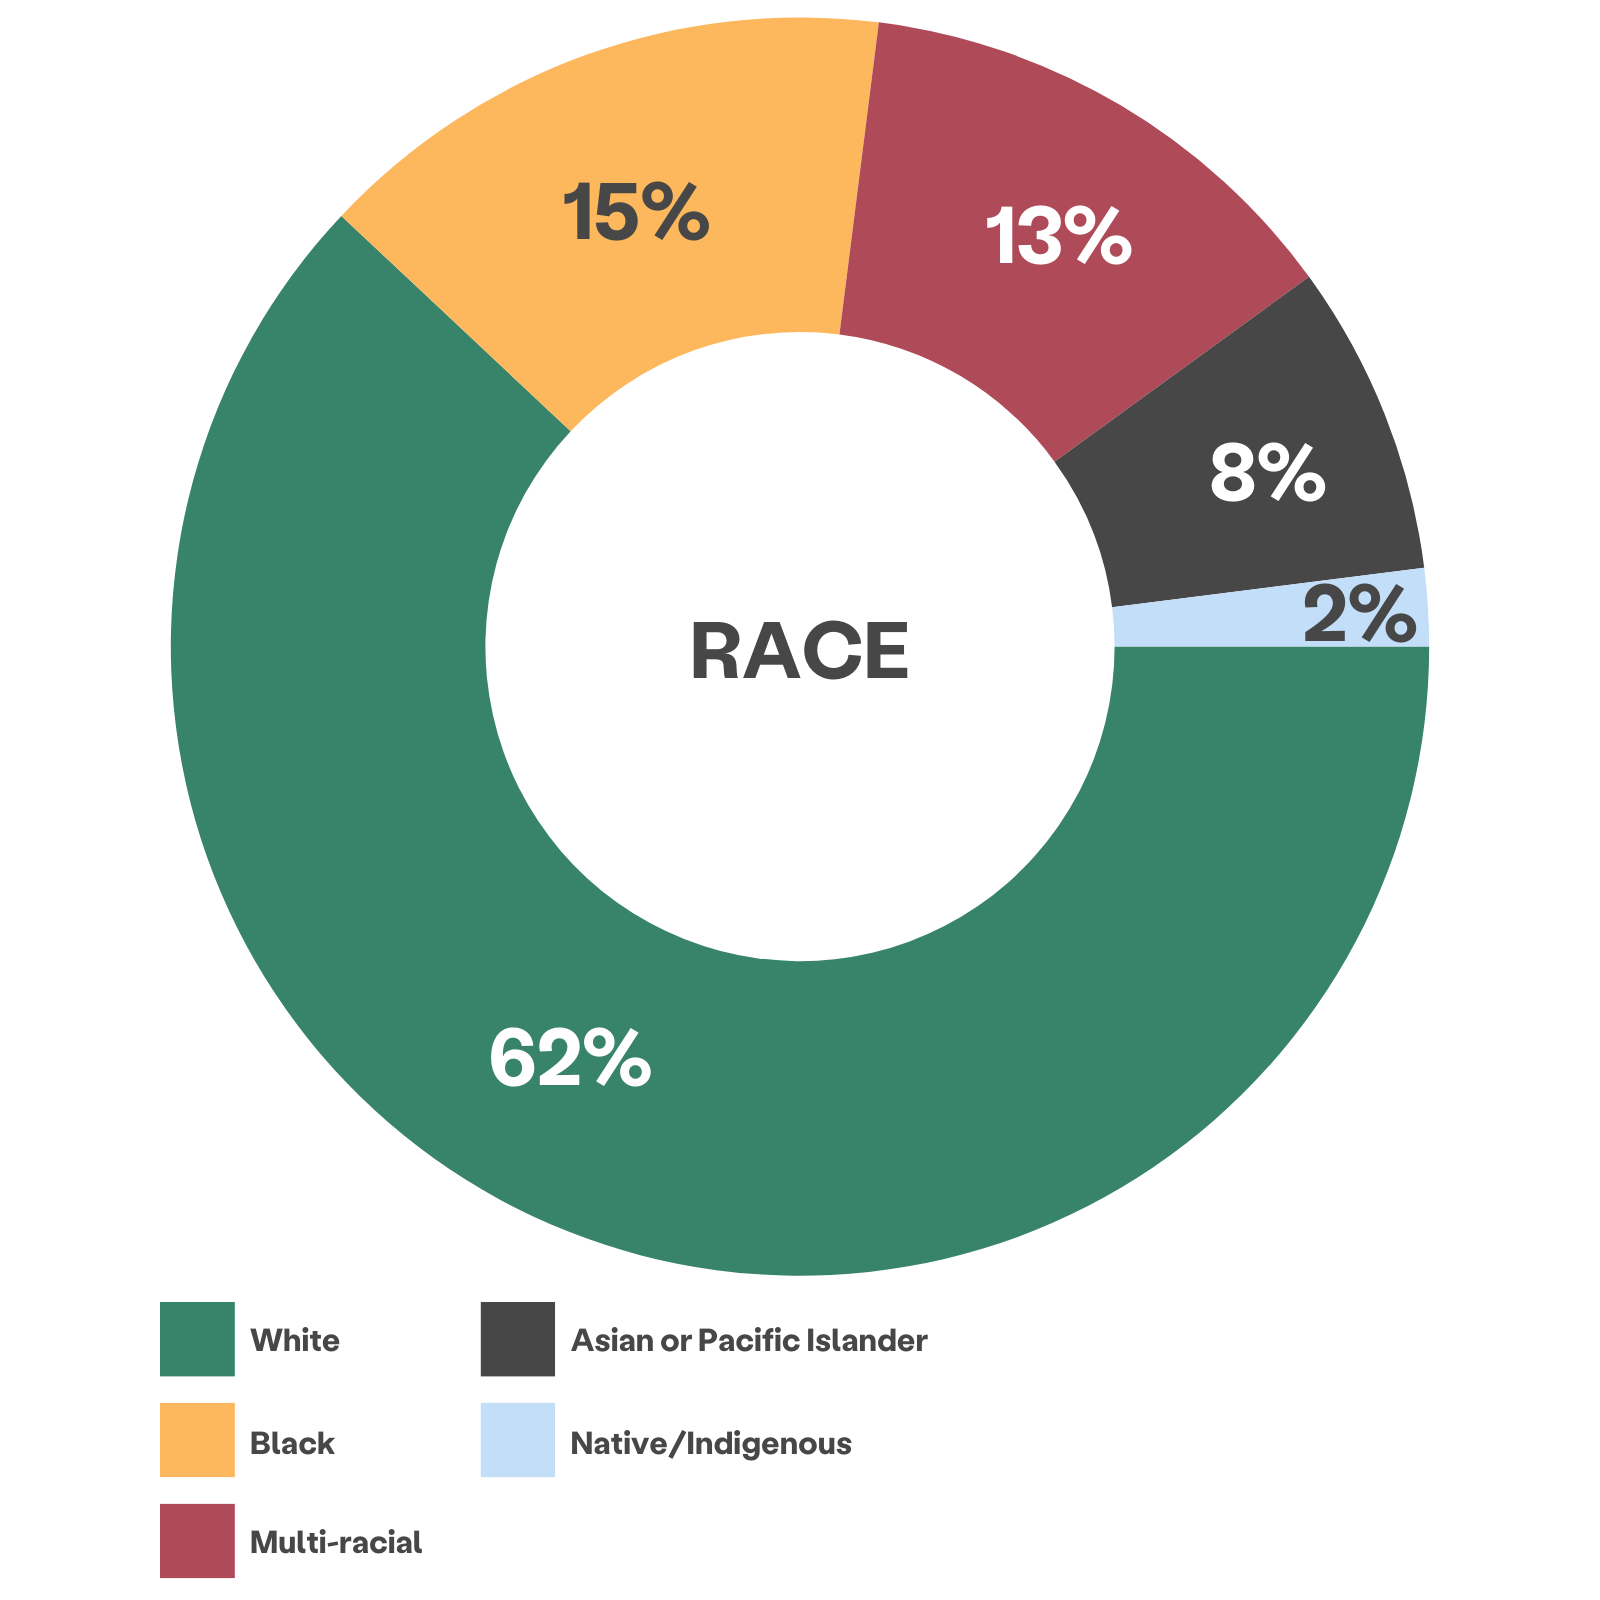 multi-colored wheel chart showing client race: 62% white, 15% Black, 13% multi-racial, 8% Asian or Pacific Islander, 2% Native/Indigenous